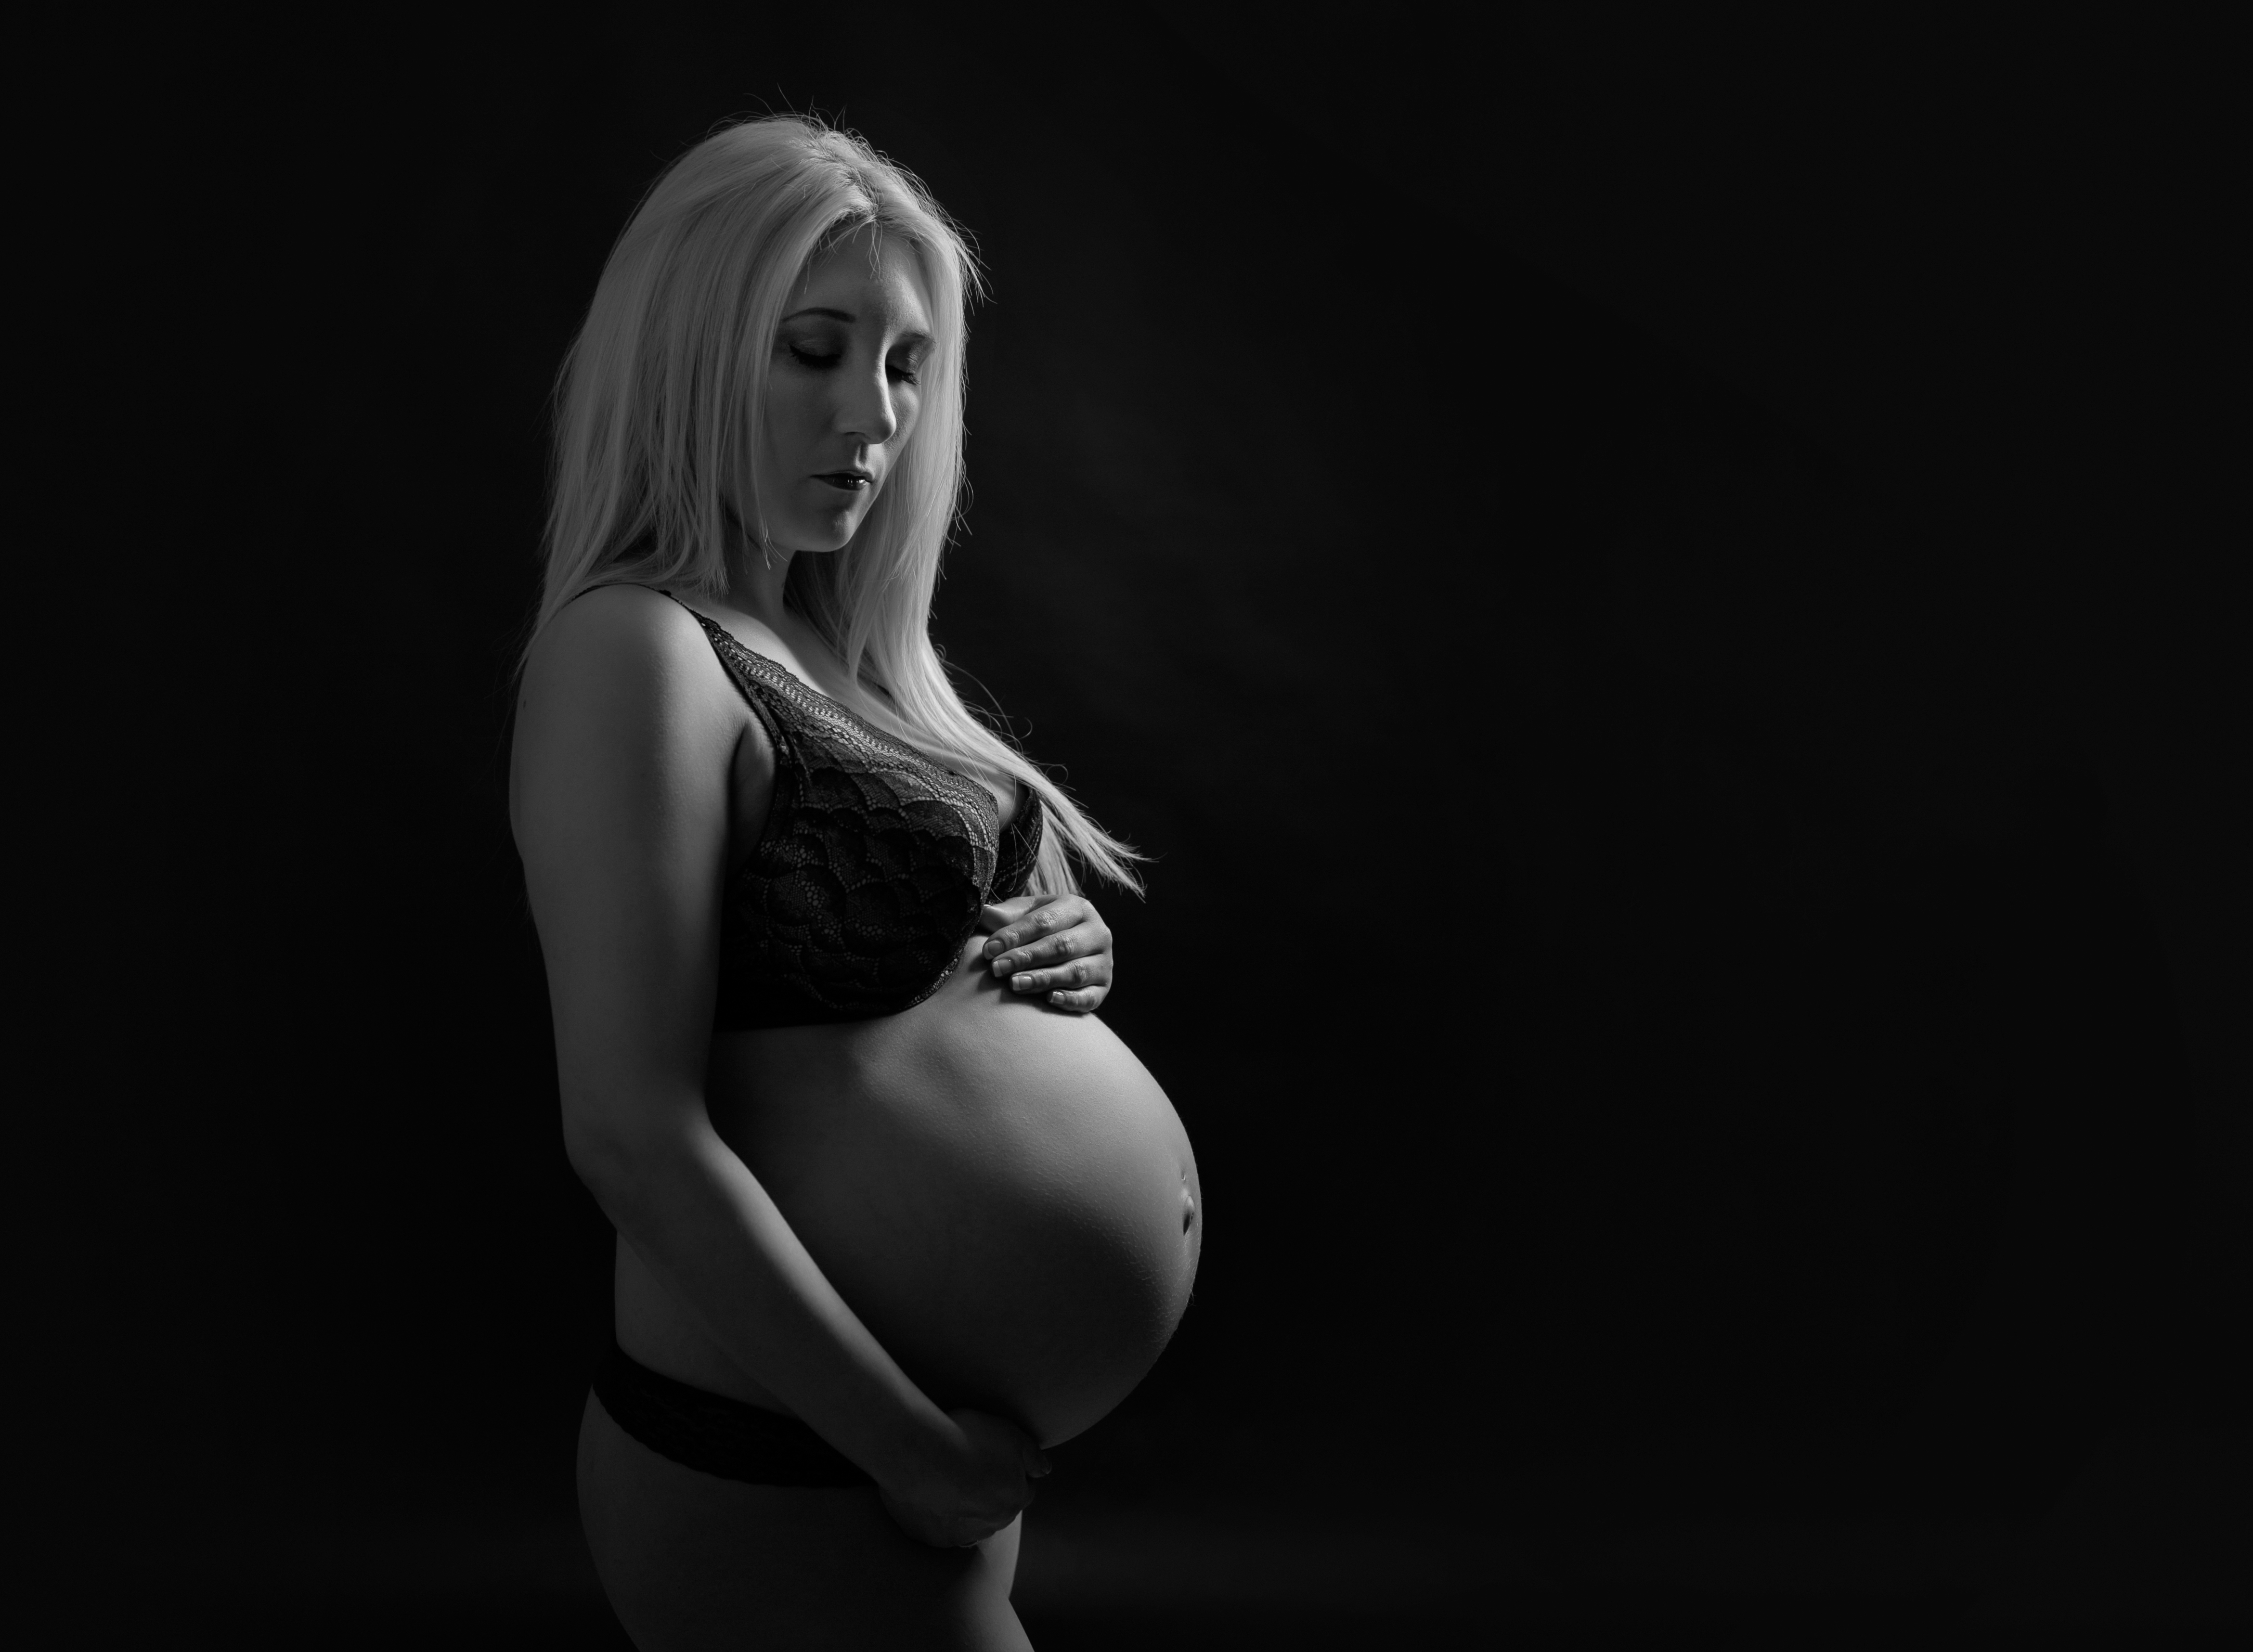 Studio maternity portrait on a dark background, with the pregnant mother standing in a black dress, her expectant belly featured, while she looks at the camera. Image by Helga Himer Photography, Sudbury, Ontario.